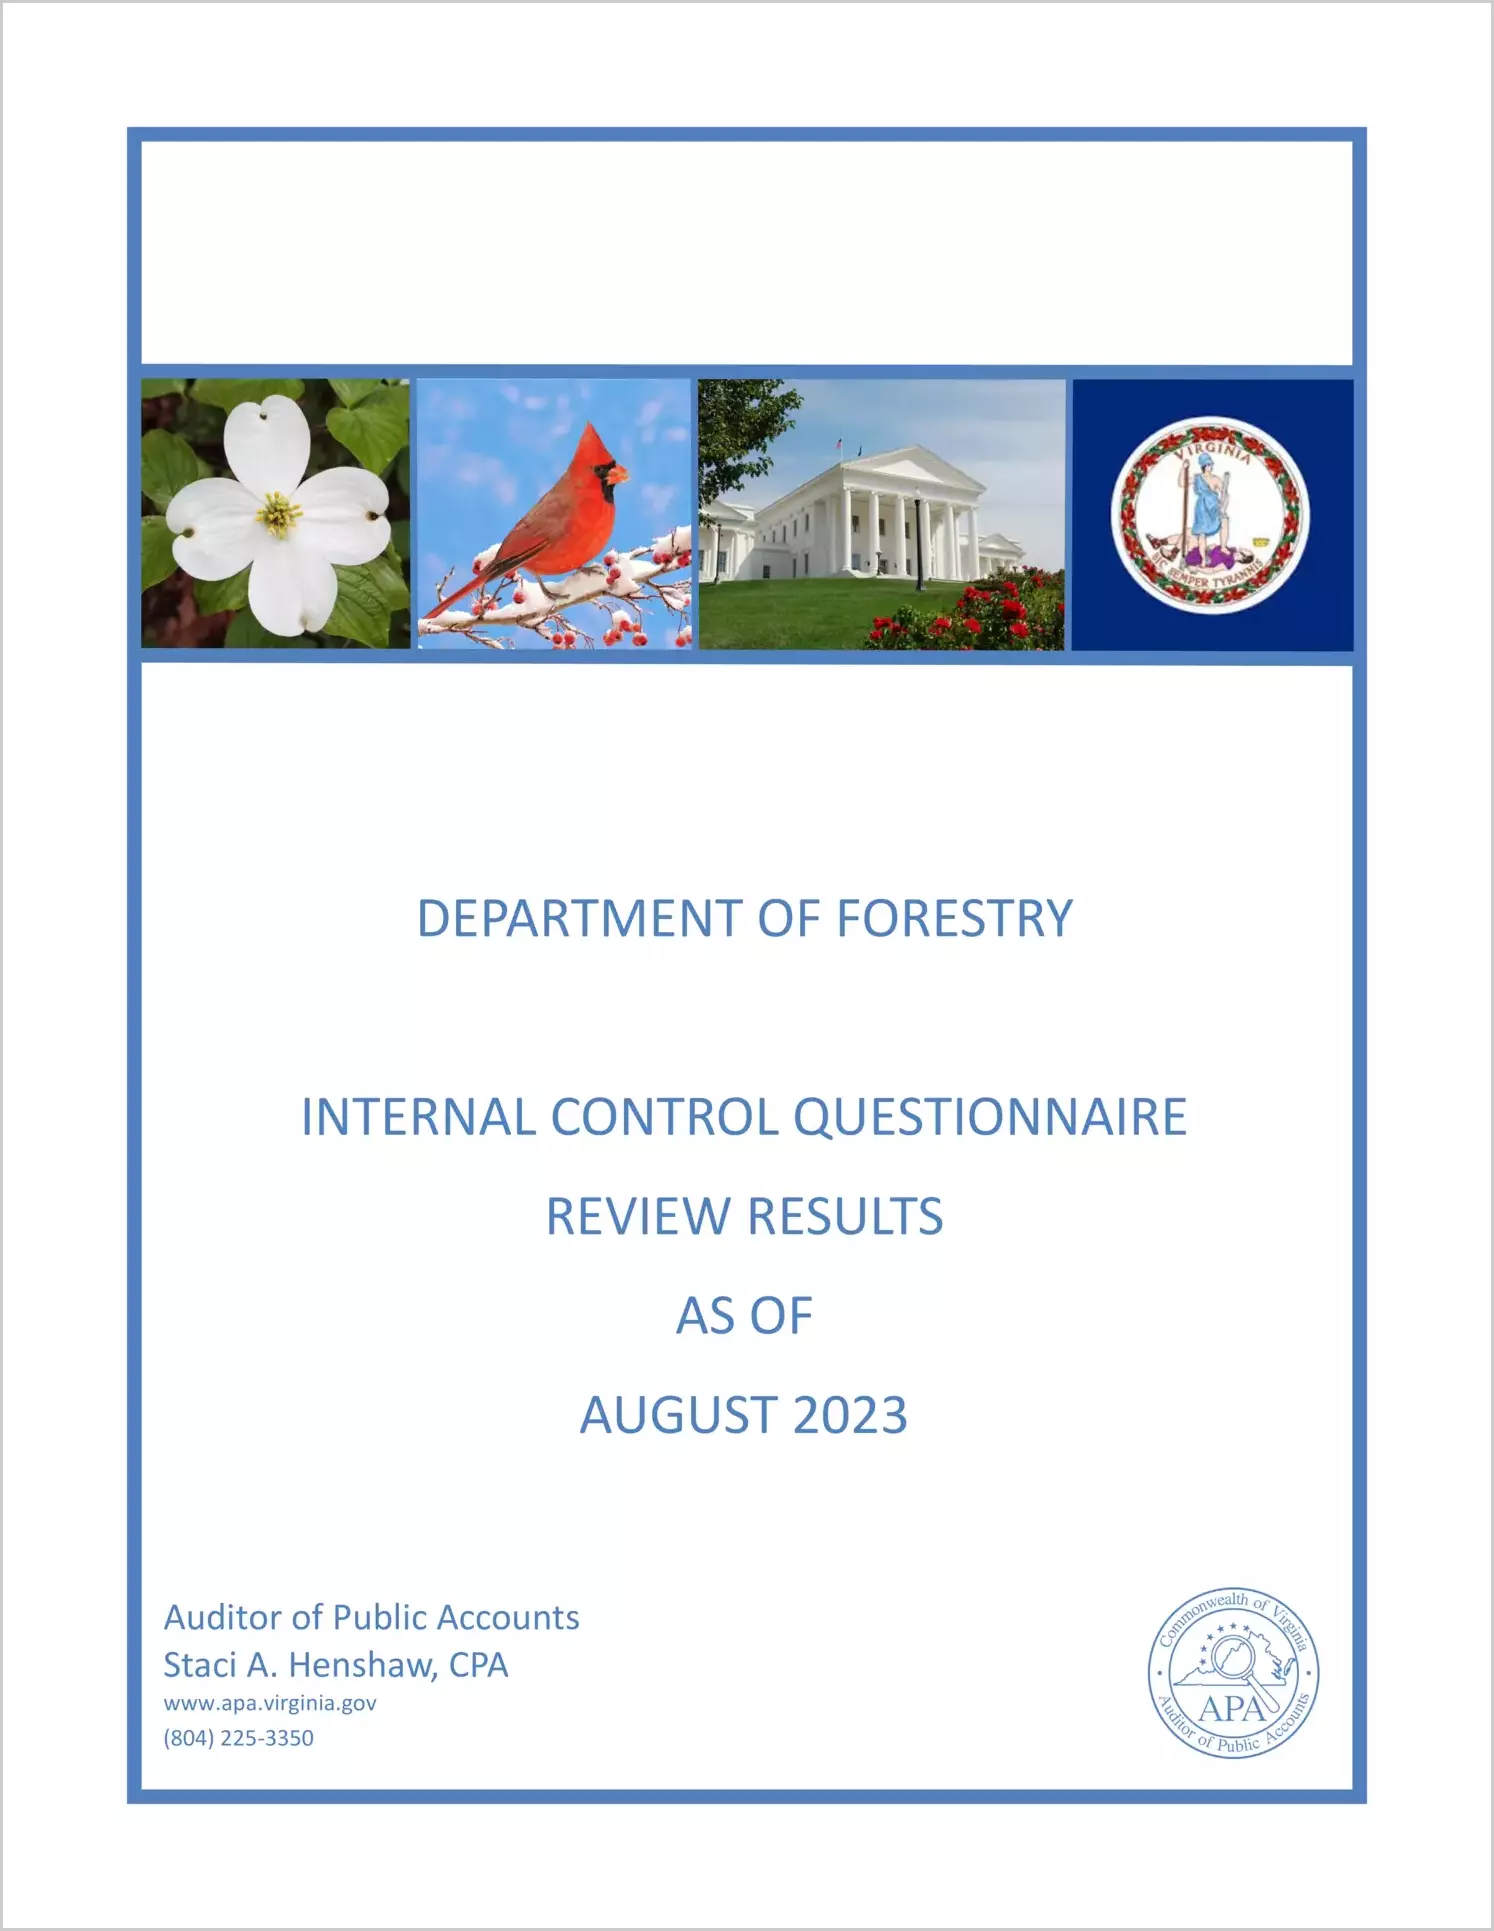 Department of Forestry Internal Control Questionnaire Review Results as of August 2023